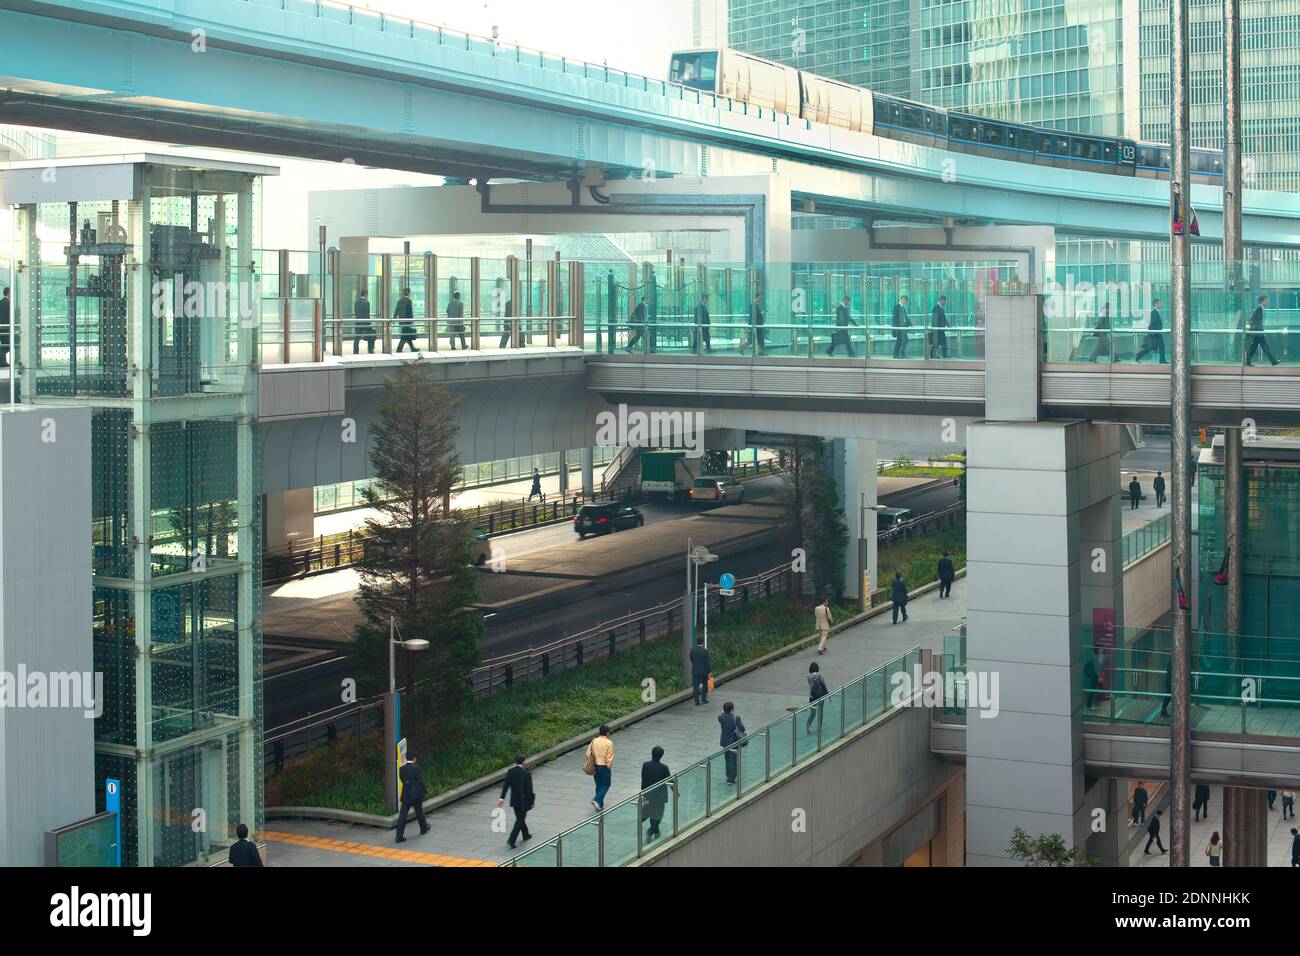 Shiodome Area, Shimbashi, Tokyo, Kanto Region, Honshu, Japan - Workers and elevatedmonorail in modern business and office area. Stock Photo